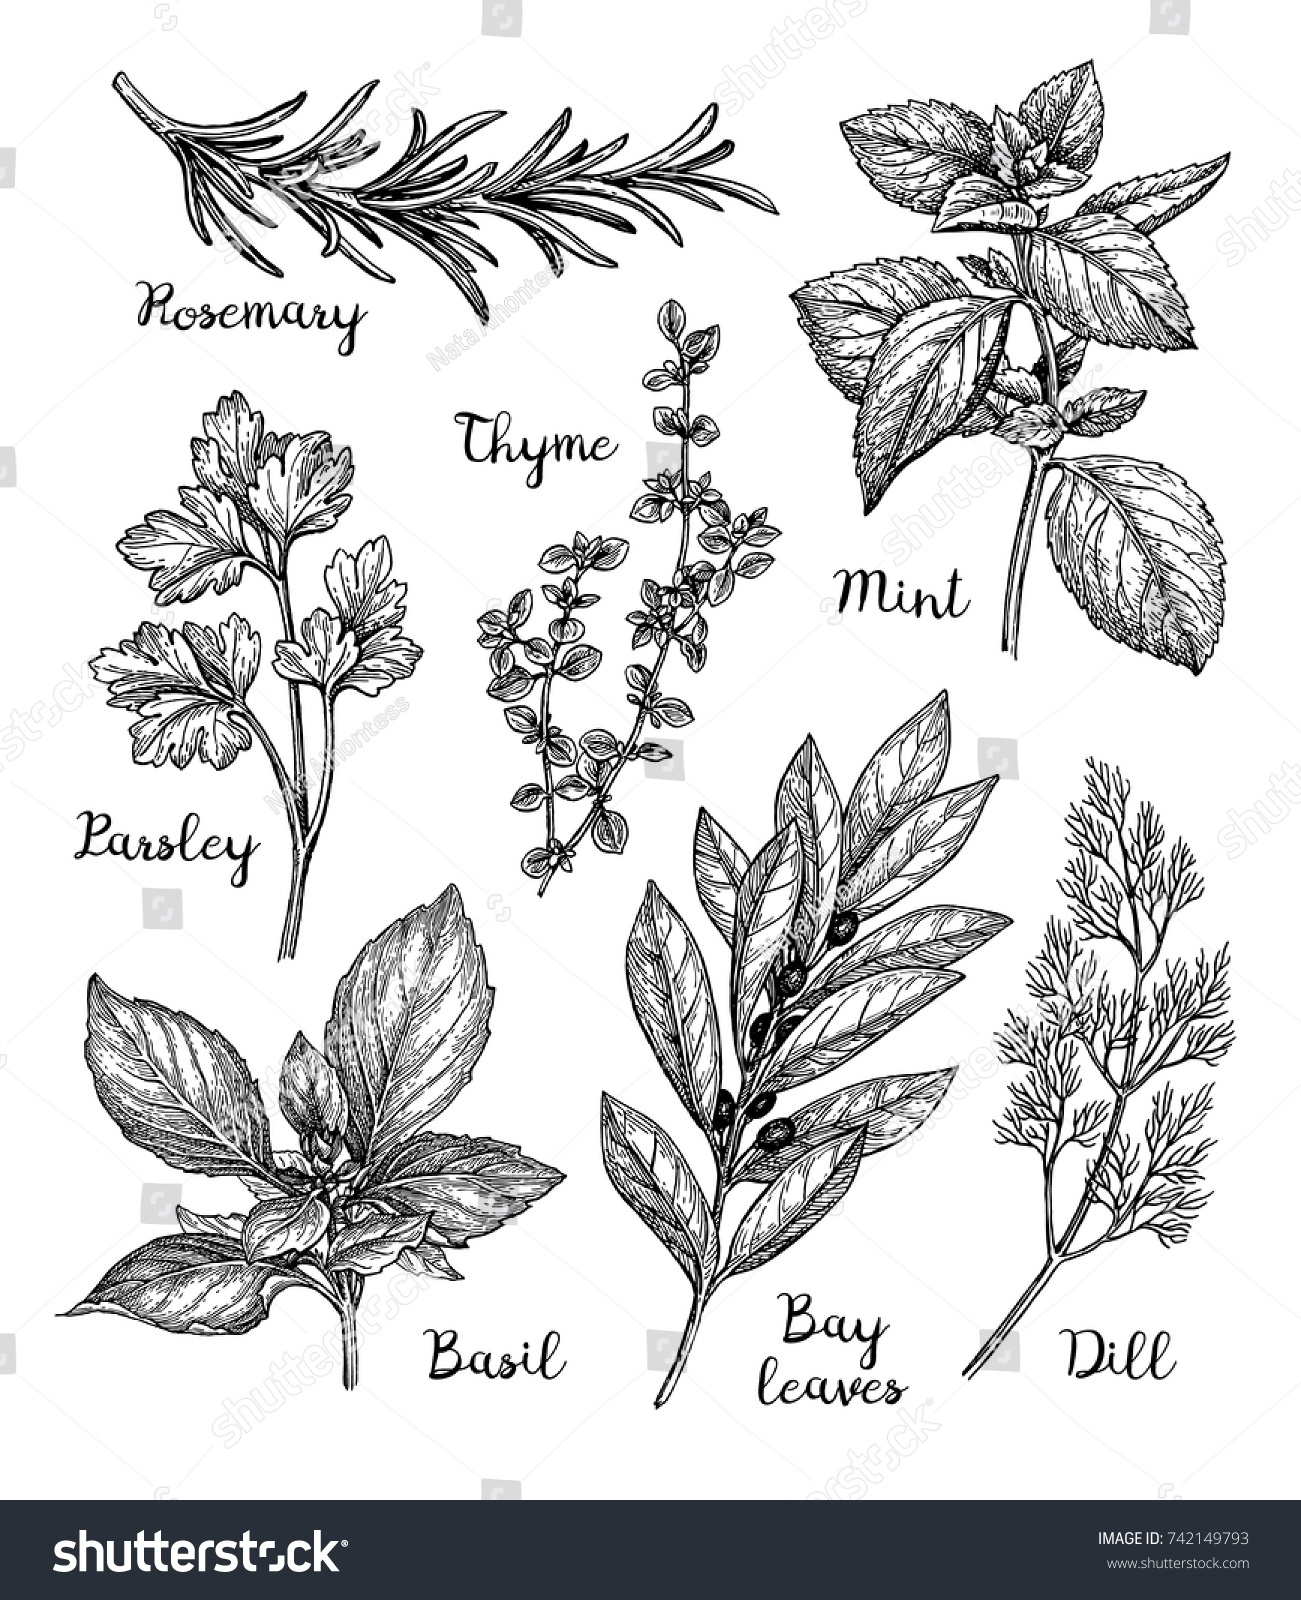 Herbs set. Ink sketch isolated on white background. Hand drawn vector illustration. Retro style. #742149793